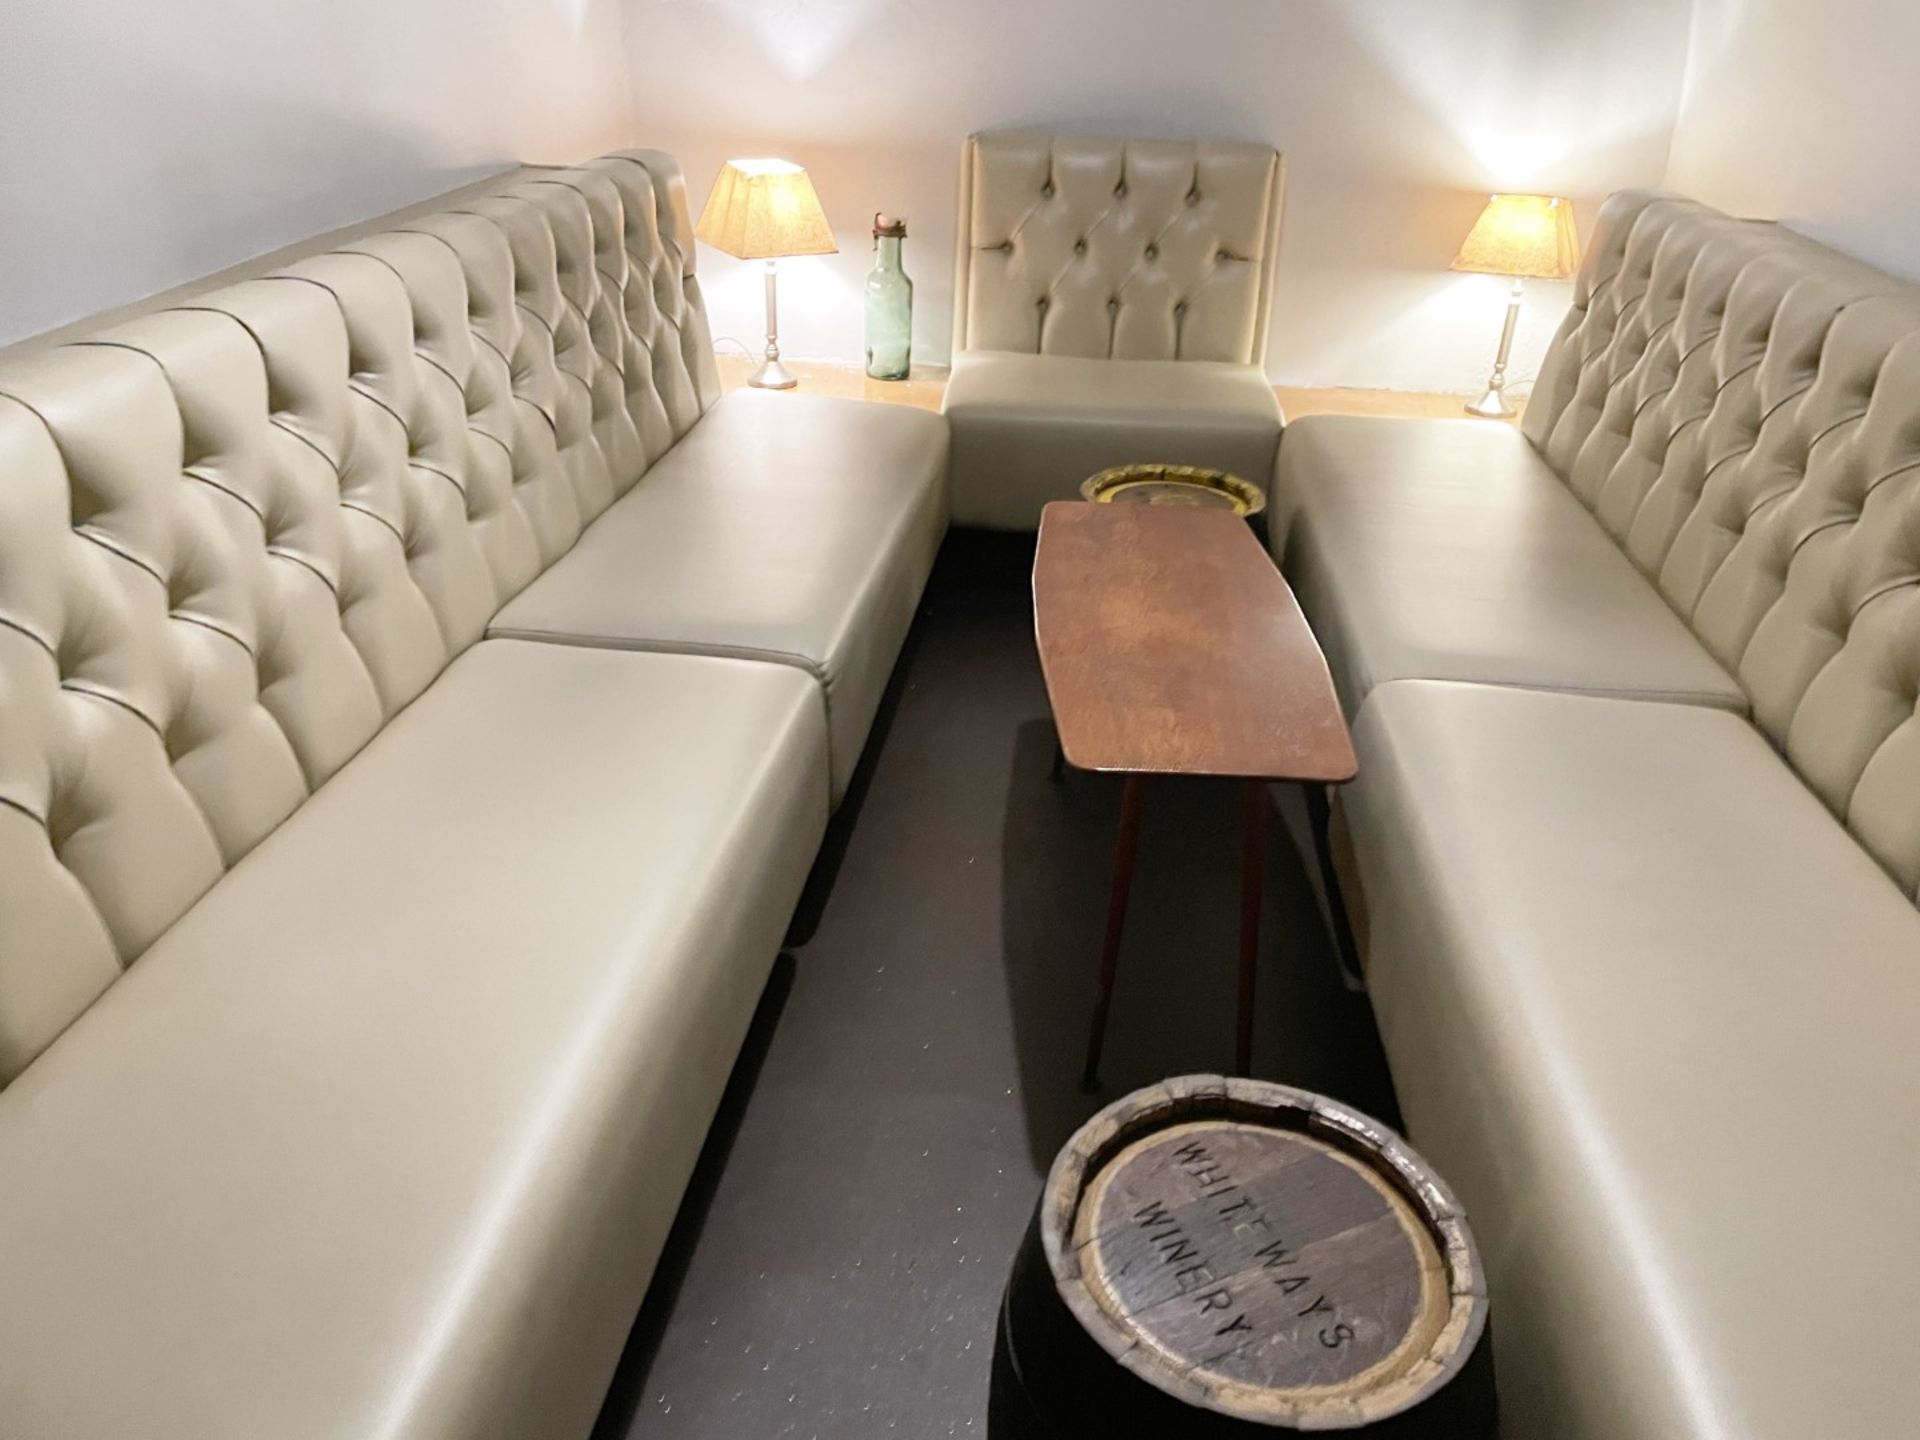 5 x Sections of Button Back Banquette Booth Seating Upholstered in a Cream Faux Leather - Image 5 of 6